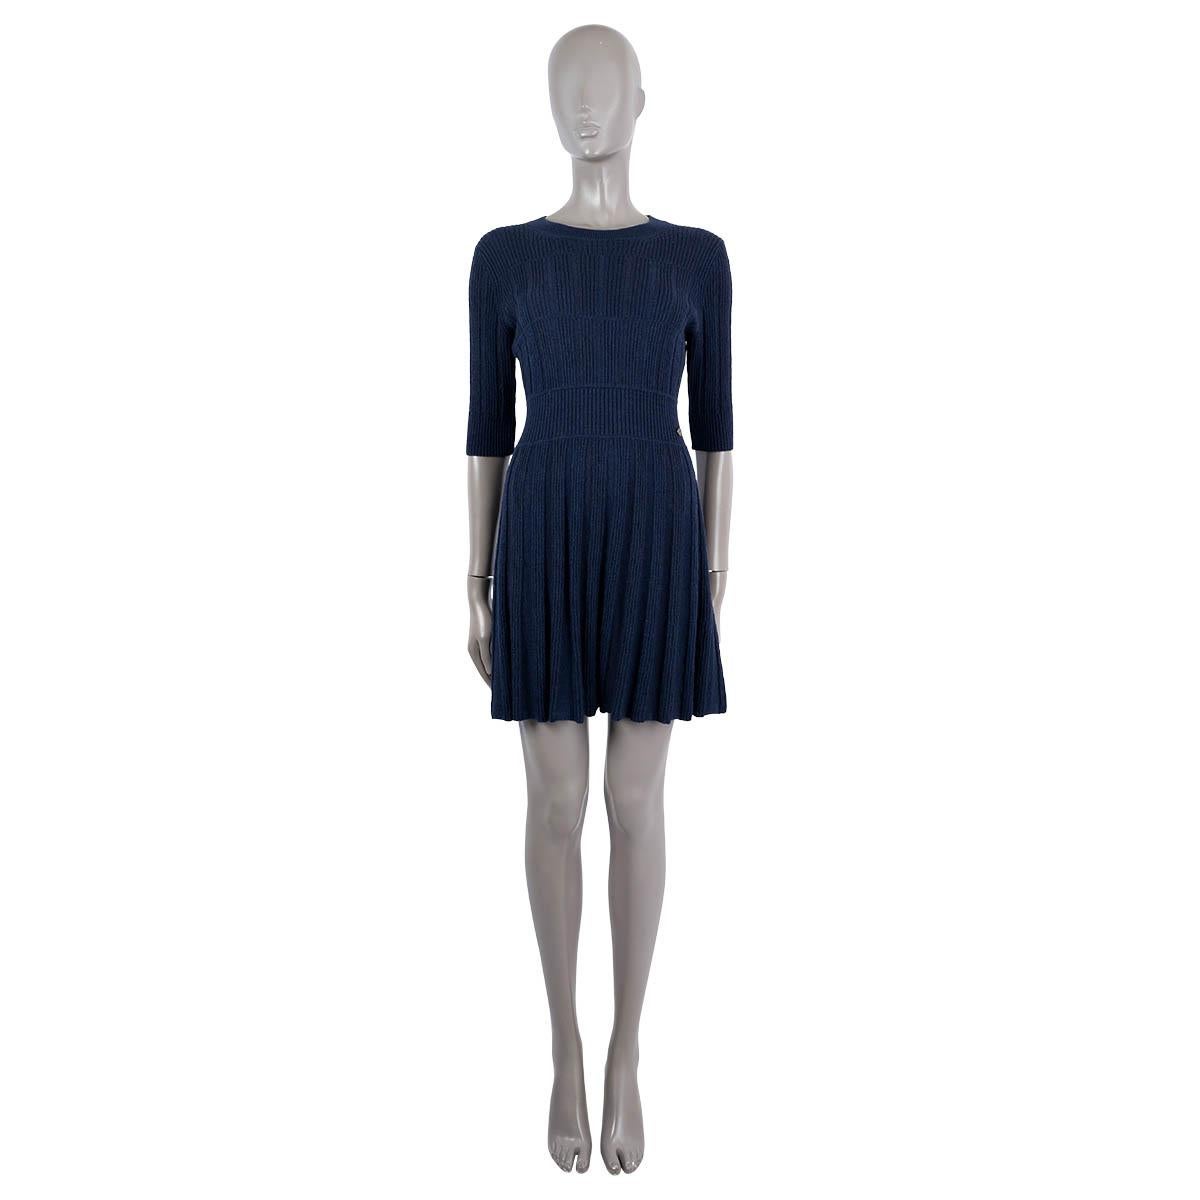 100% authentic Chanel textured flared rib-knit dress in navy blue alpaca (67%) and wool (33%) - please note the content tag is missing. Featuring short sleeves and waist band with logo button. Unlined. Has been worn and is in excellent